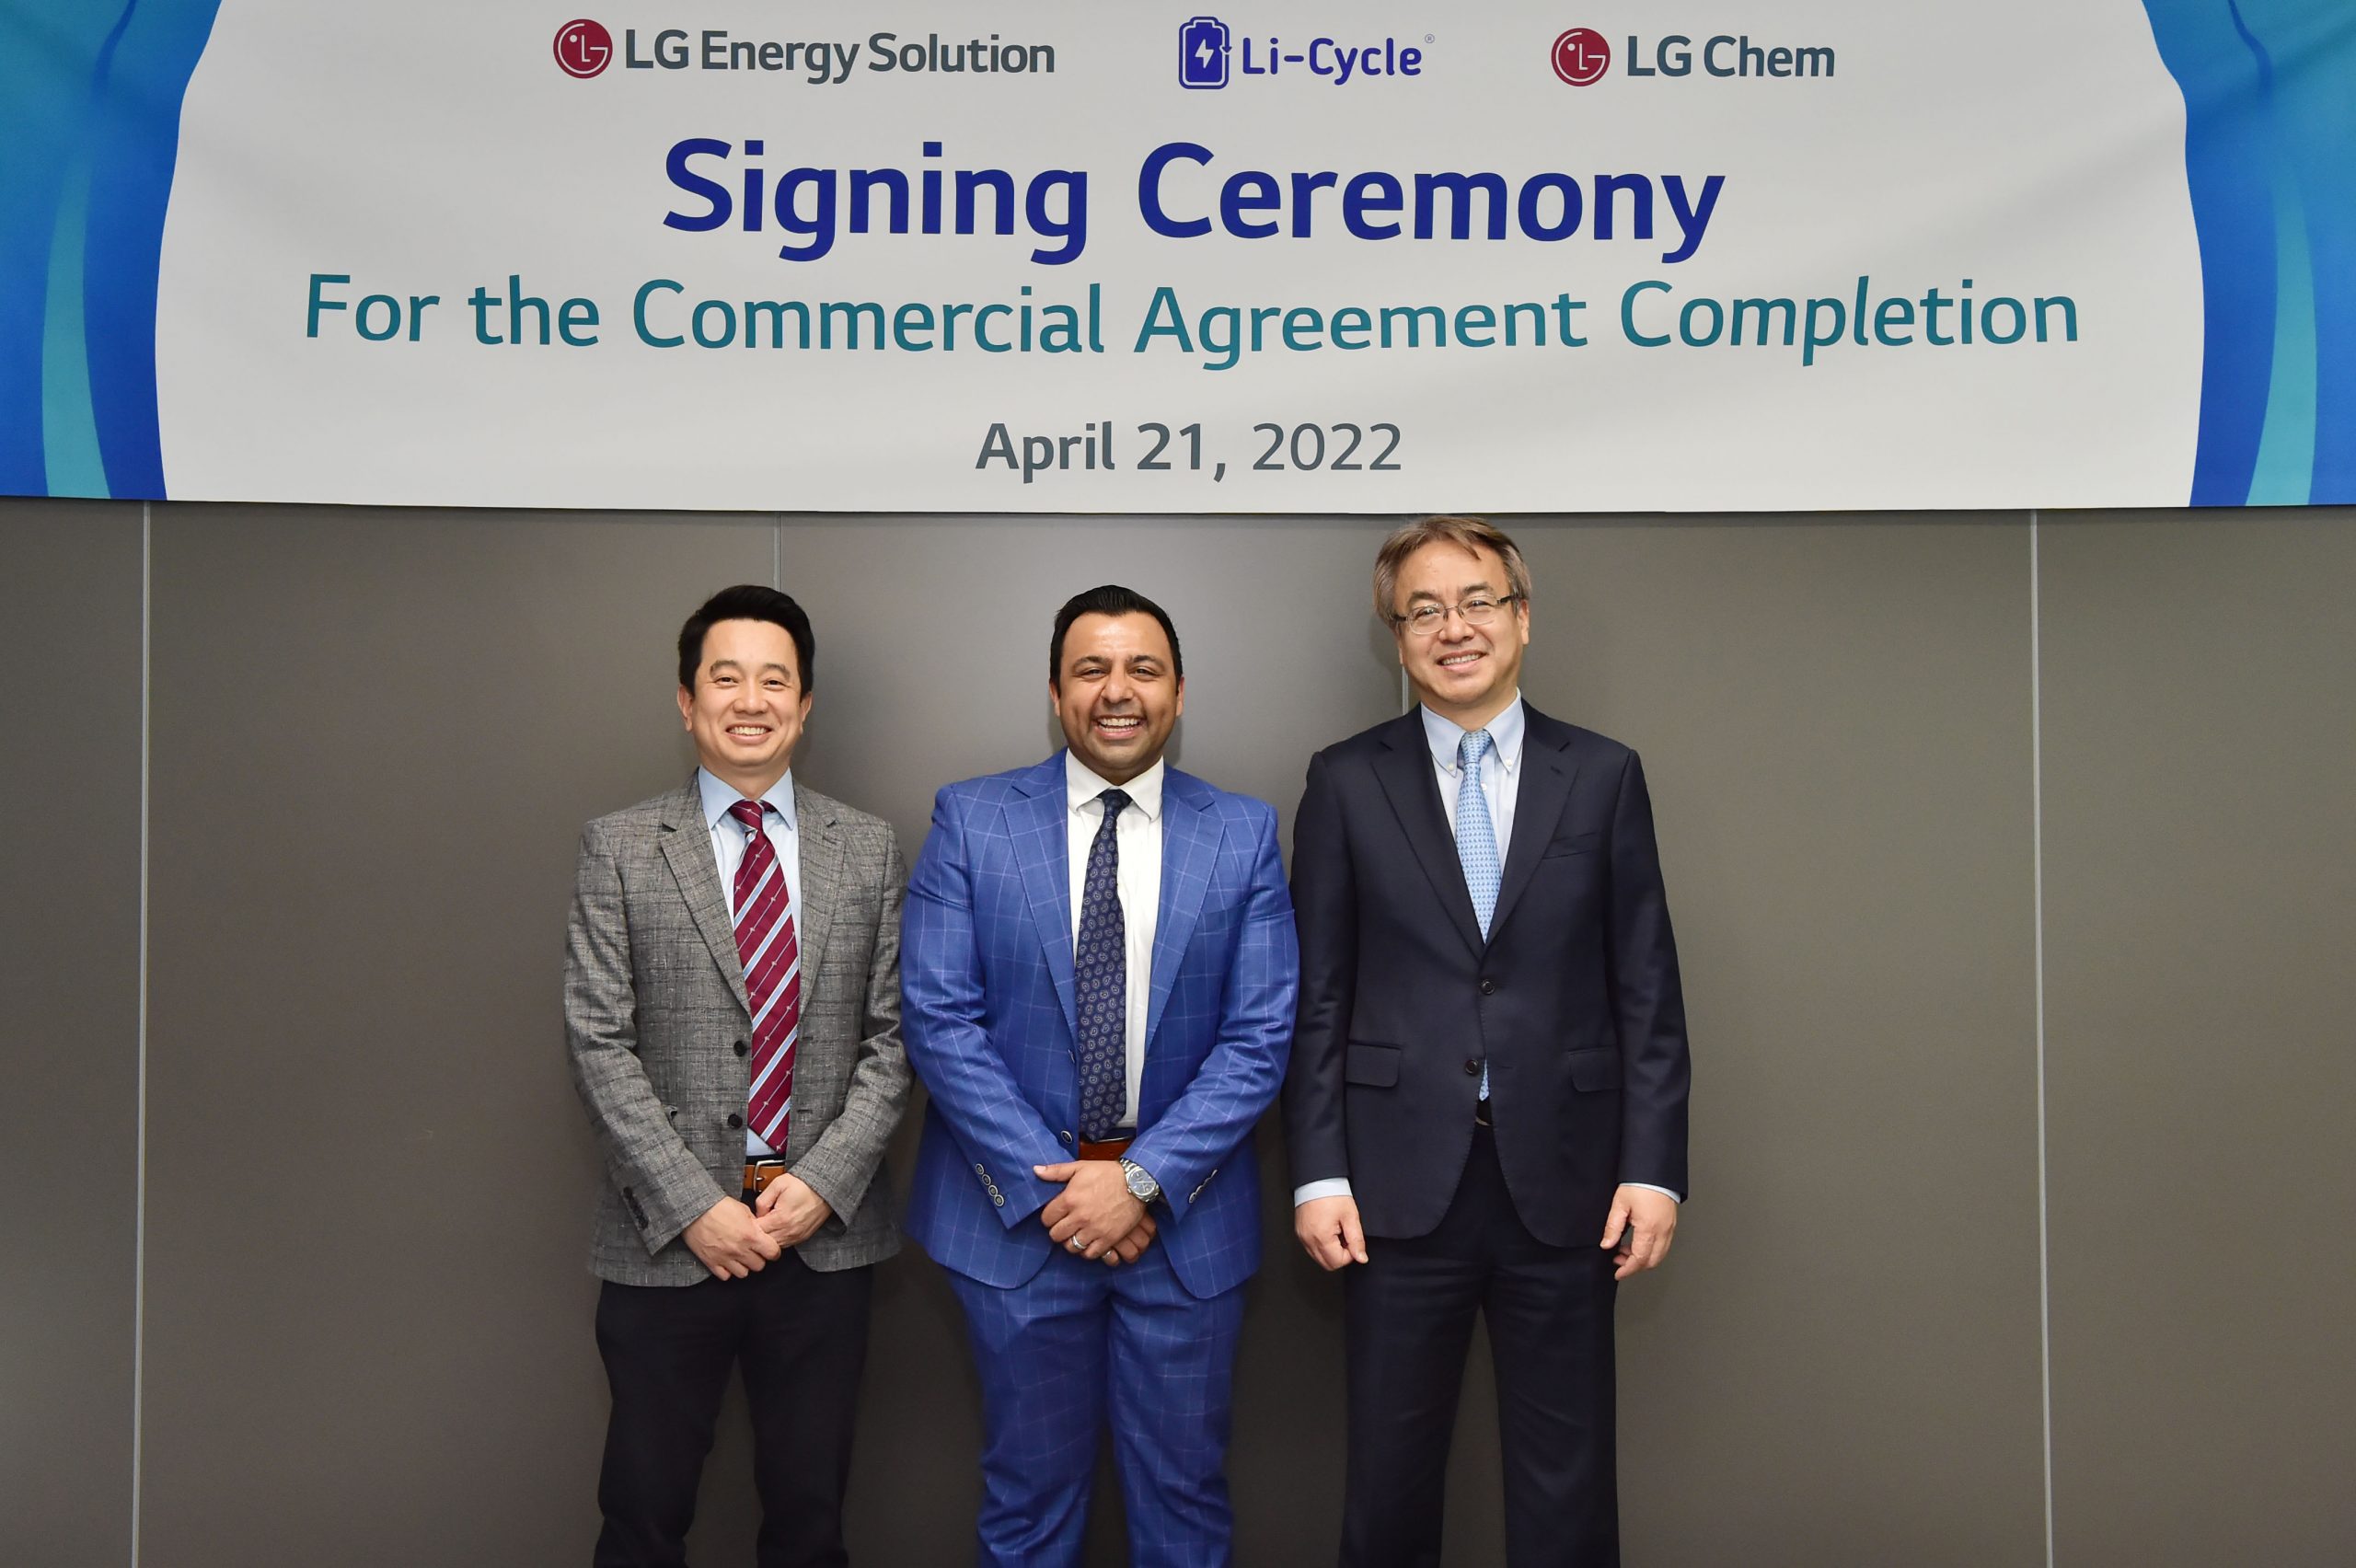 Signing cermony with LG Chem and LG Energy